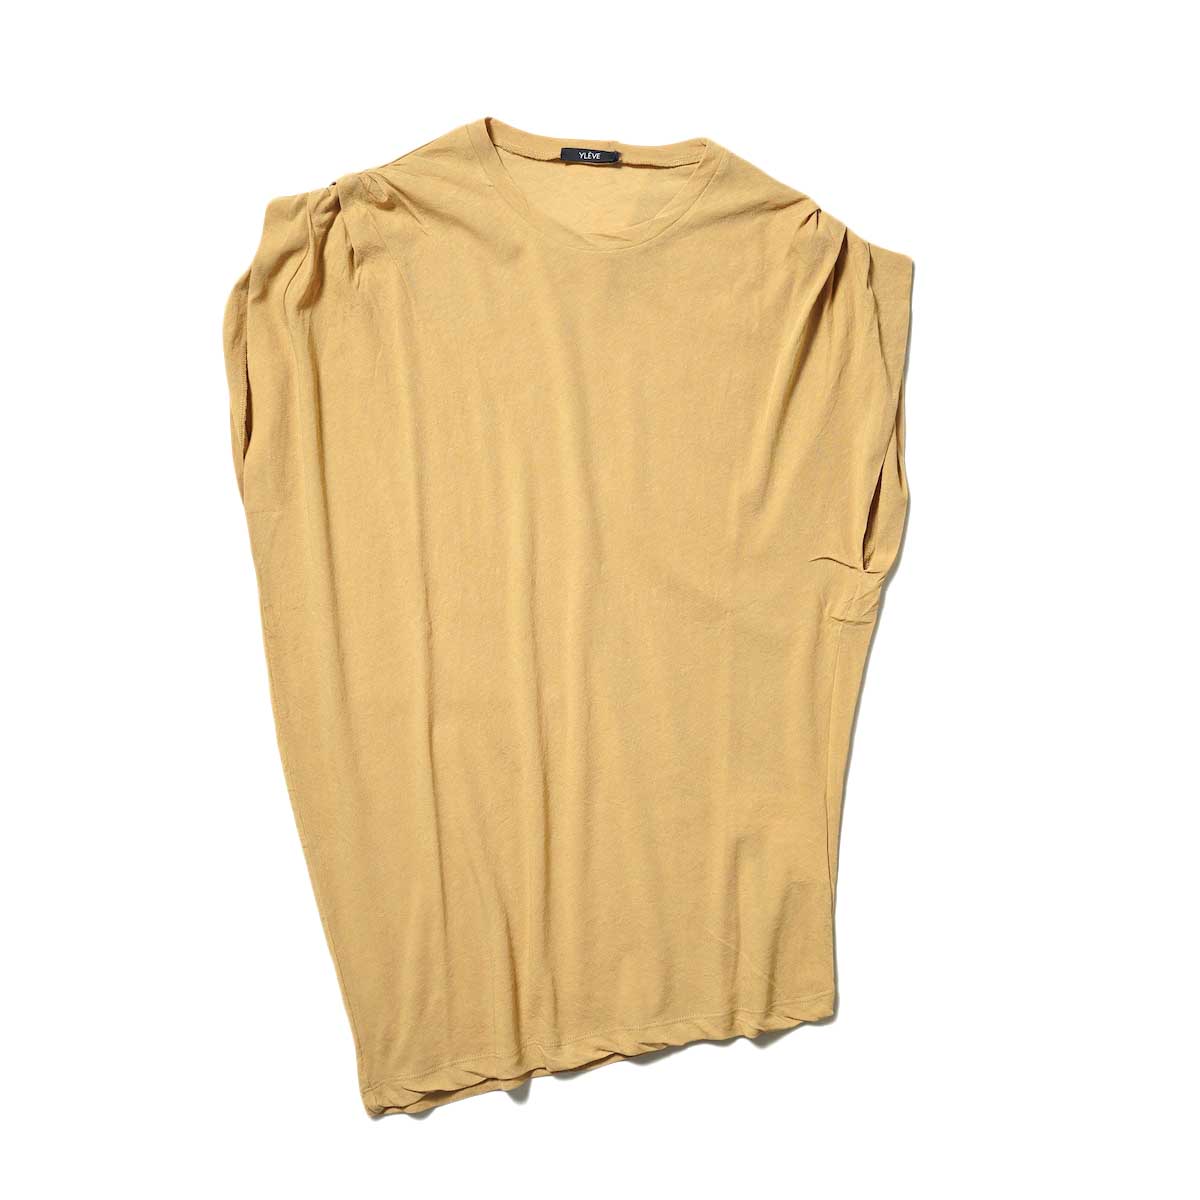 YLEVE / COTTON LINEN SHEER JERSEY TACK N/S P/O (Ocre)